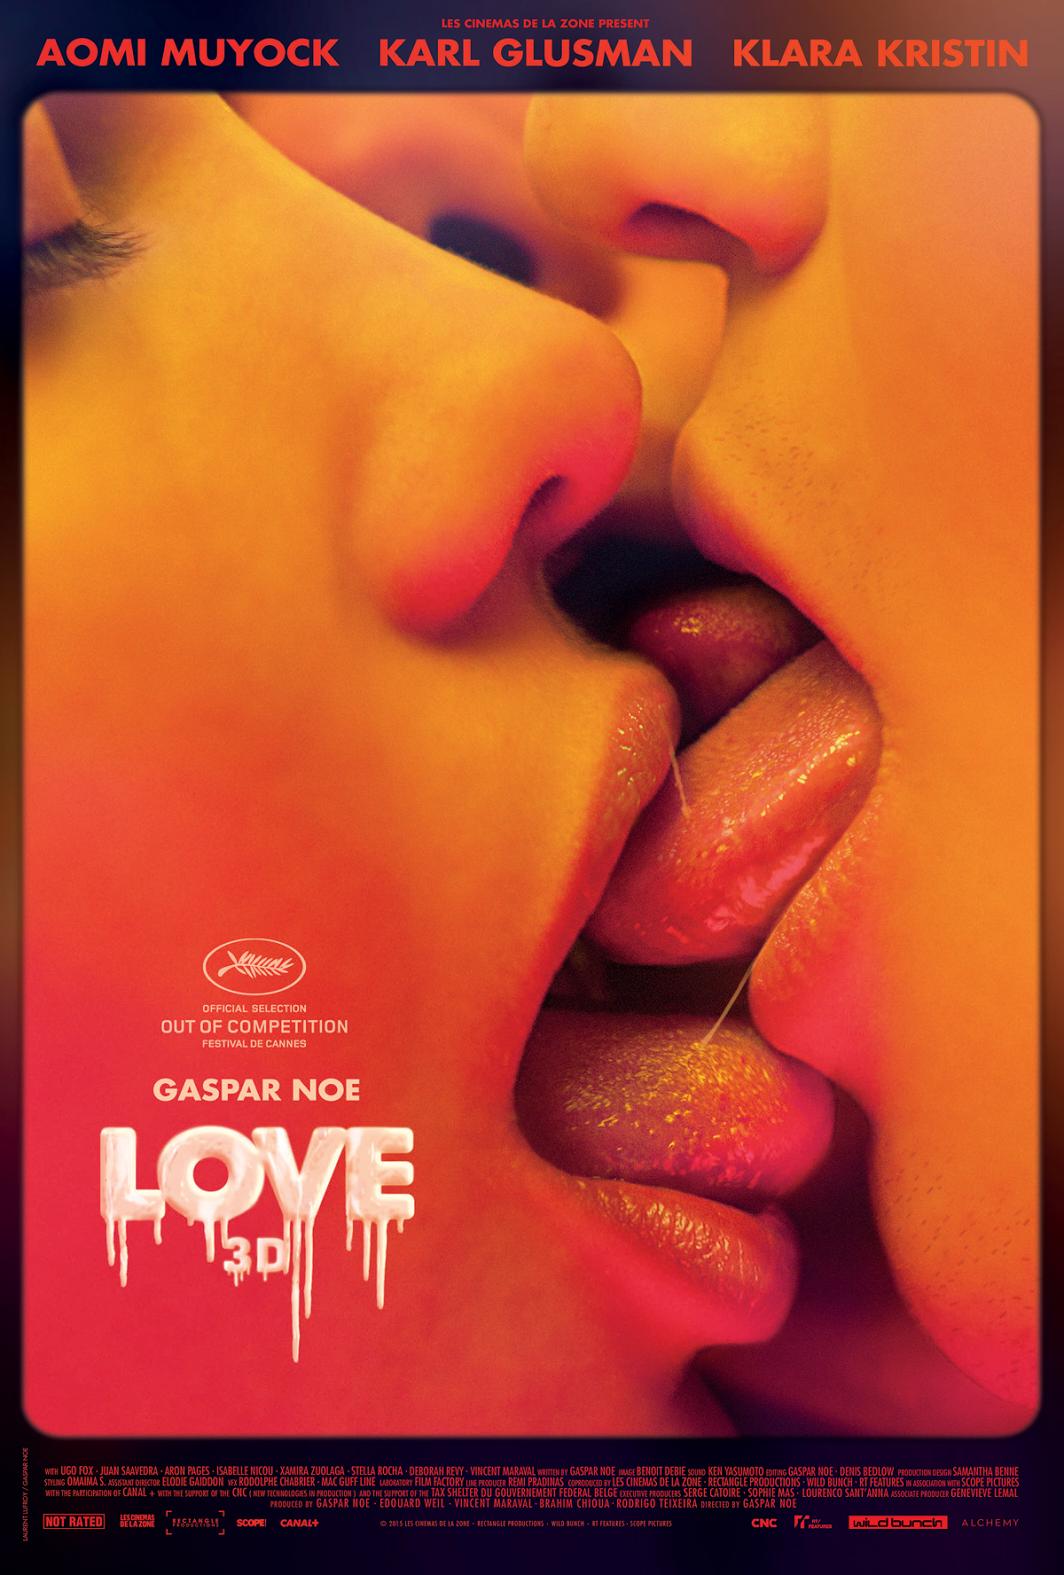 dirk fisher recommends love gaspar noe free pic